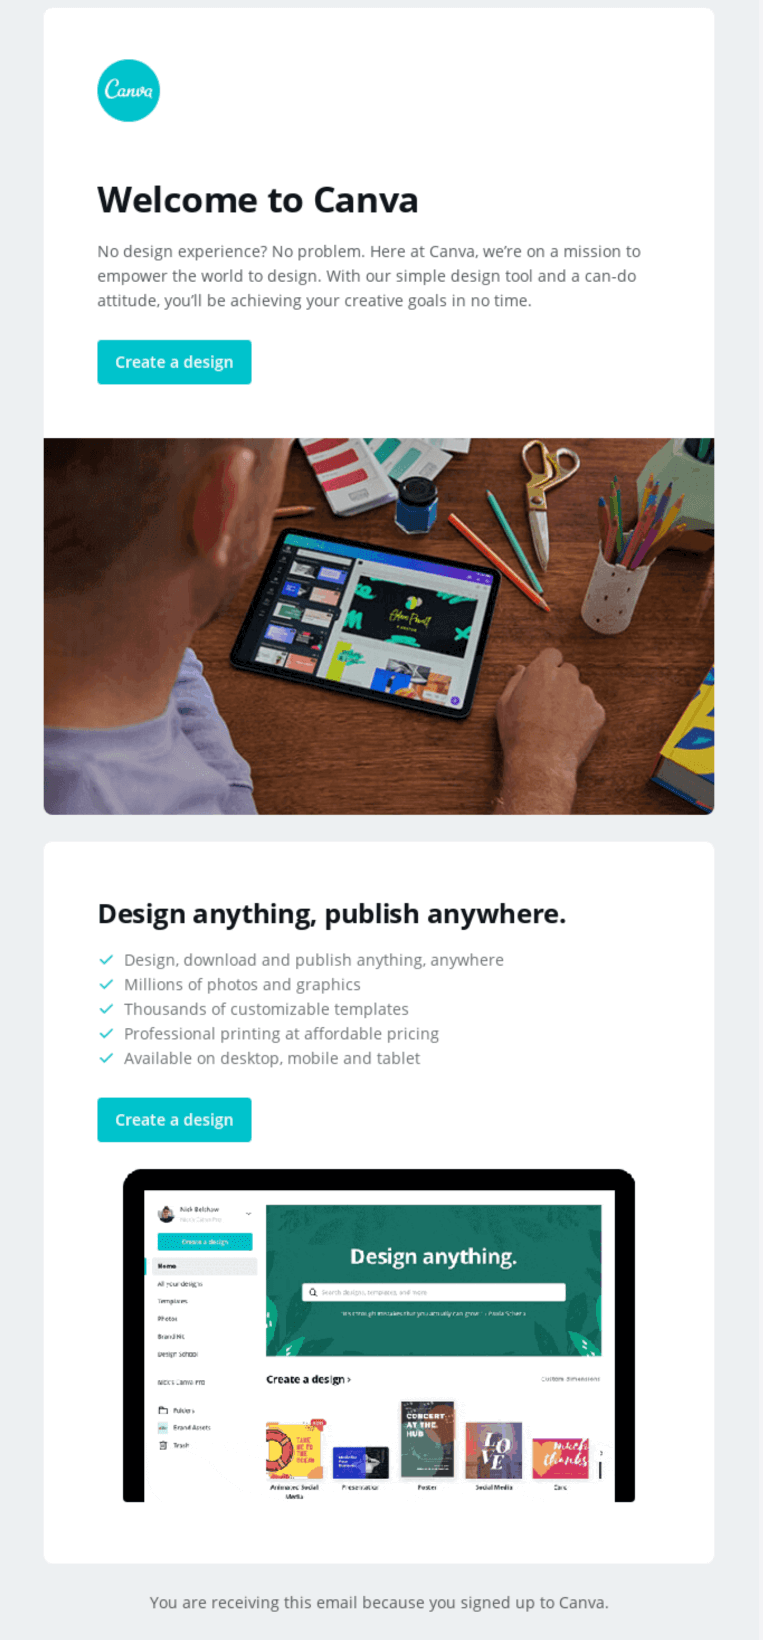 Welcome email from Canva